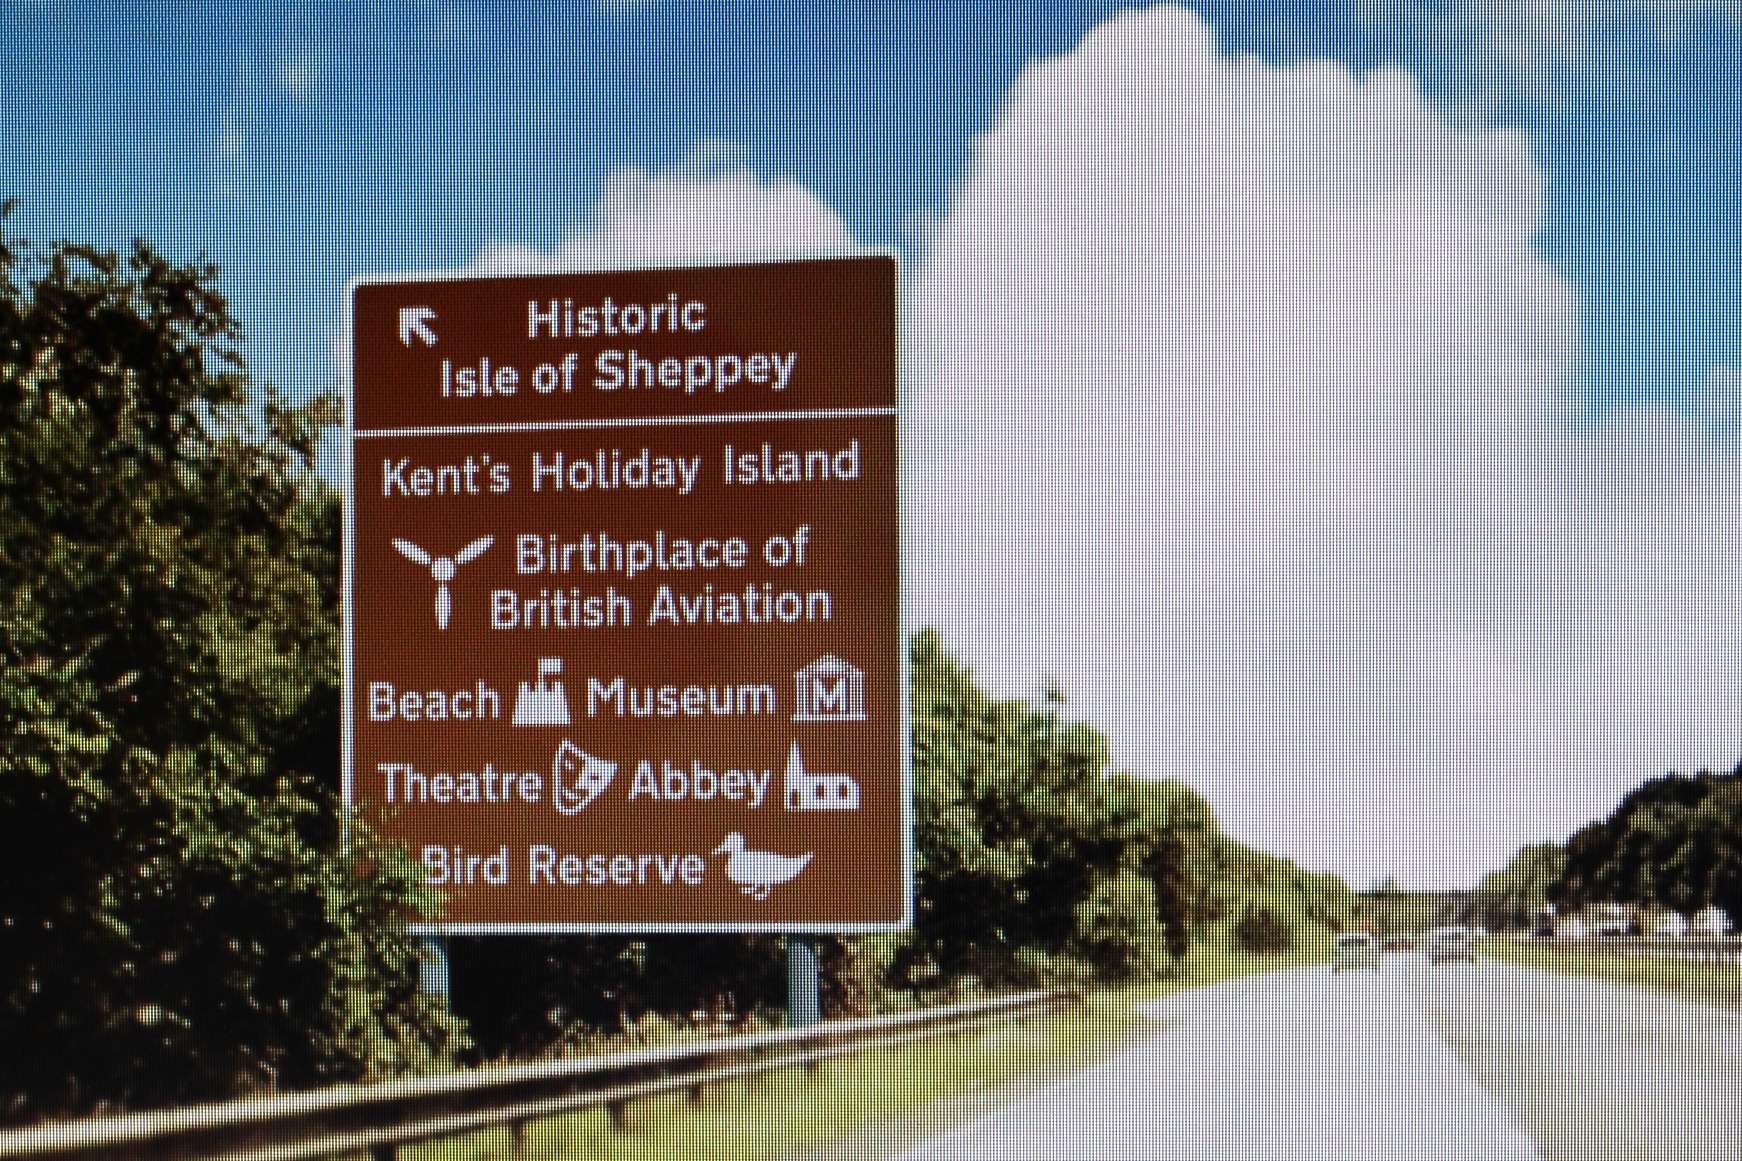 Improve tourism on the Isle of Sheppey